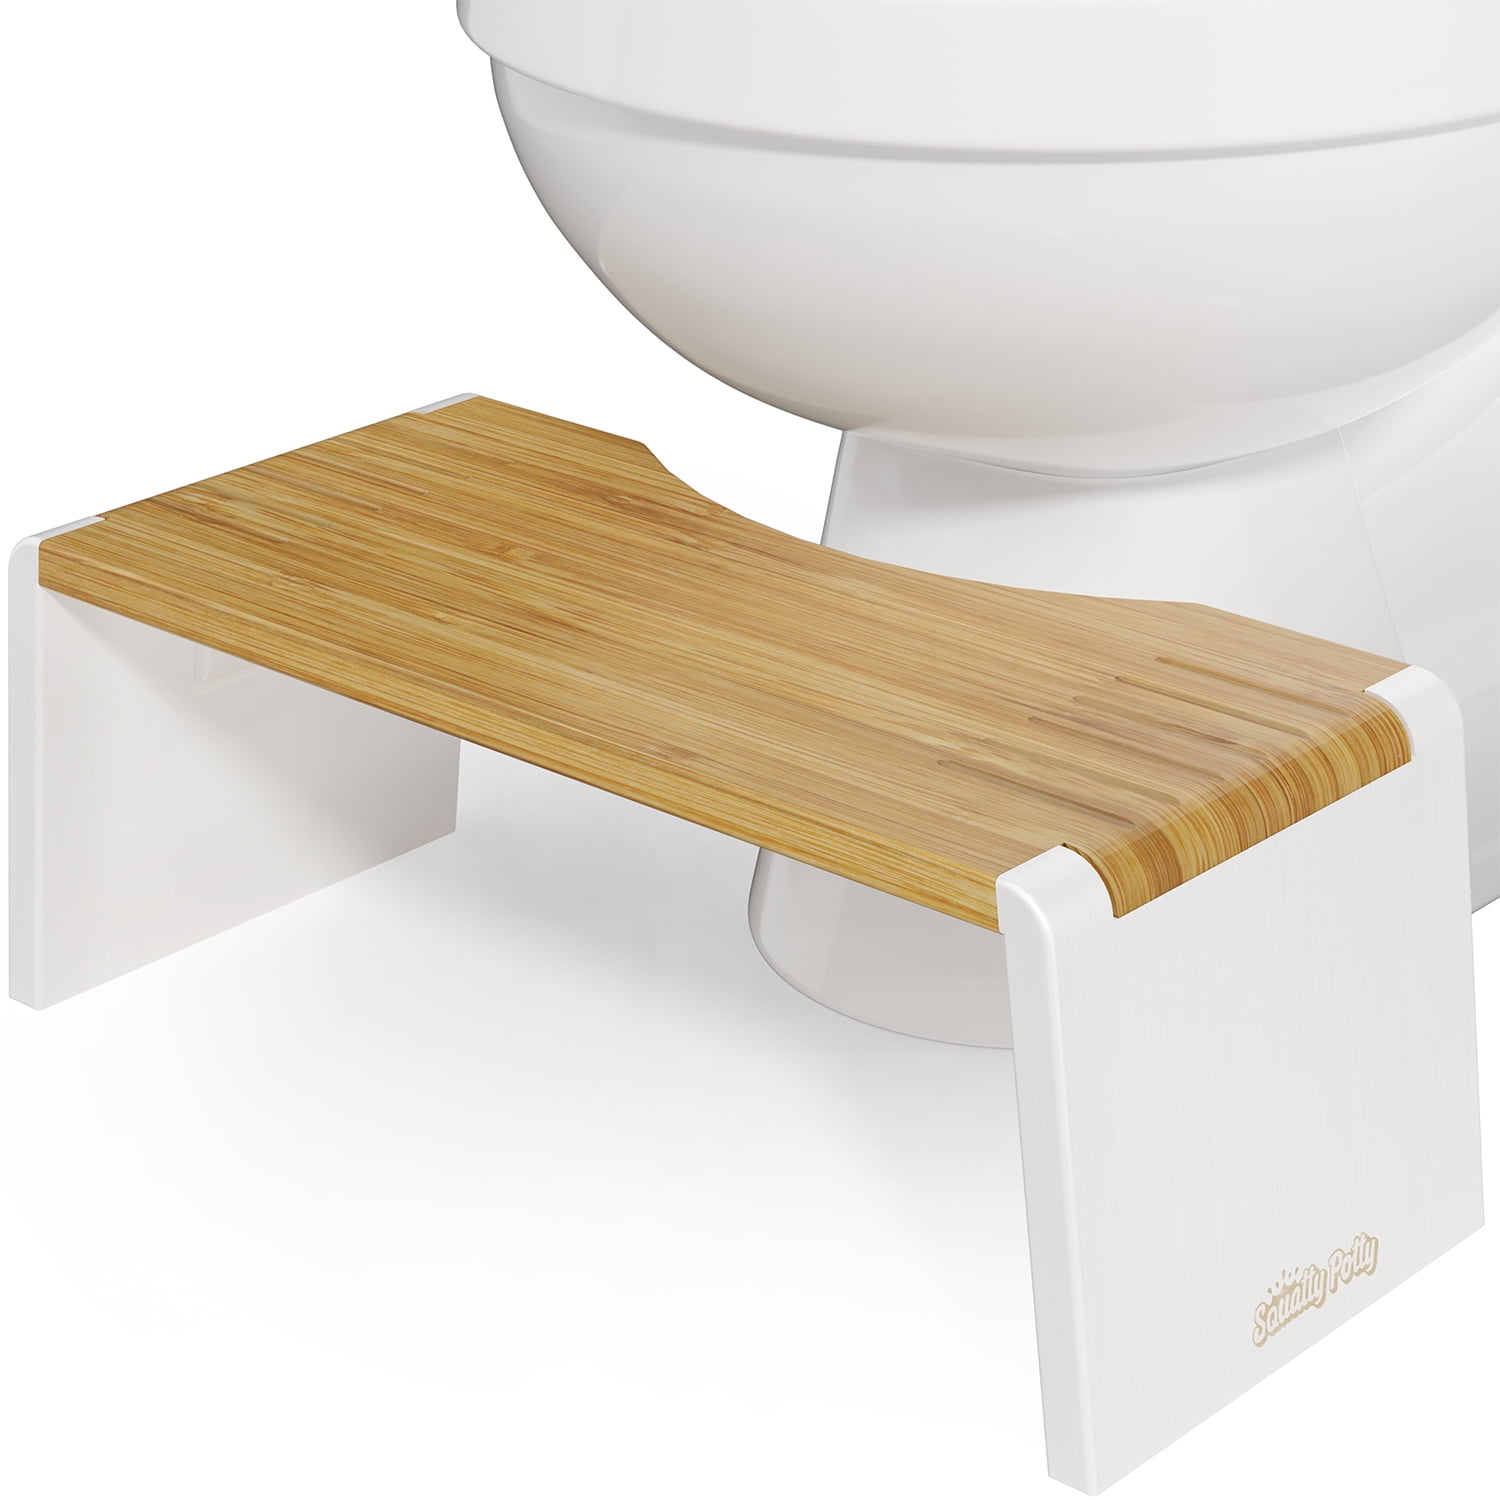 QIANGGAO Squatting Toilet Stool Fodable Bamboo Wood Bathroom Poop Stool Four gear Adjustable for Adults Potty Step Stool for Toilet Posture and Healthy Release One Pair 